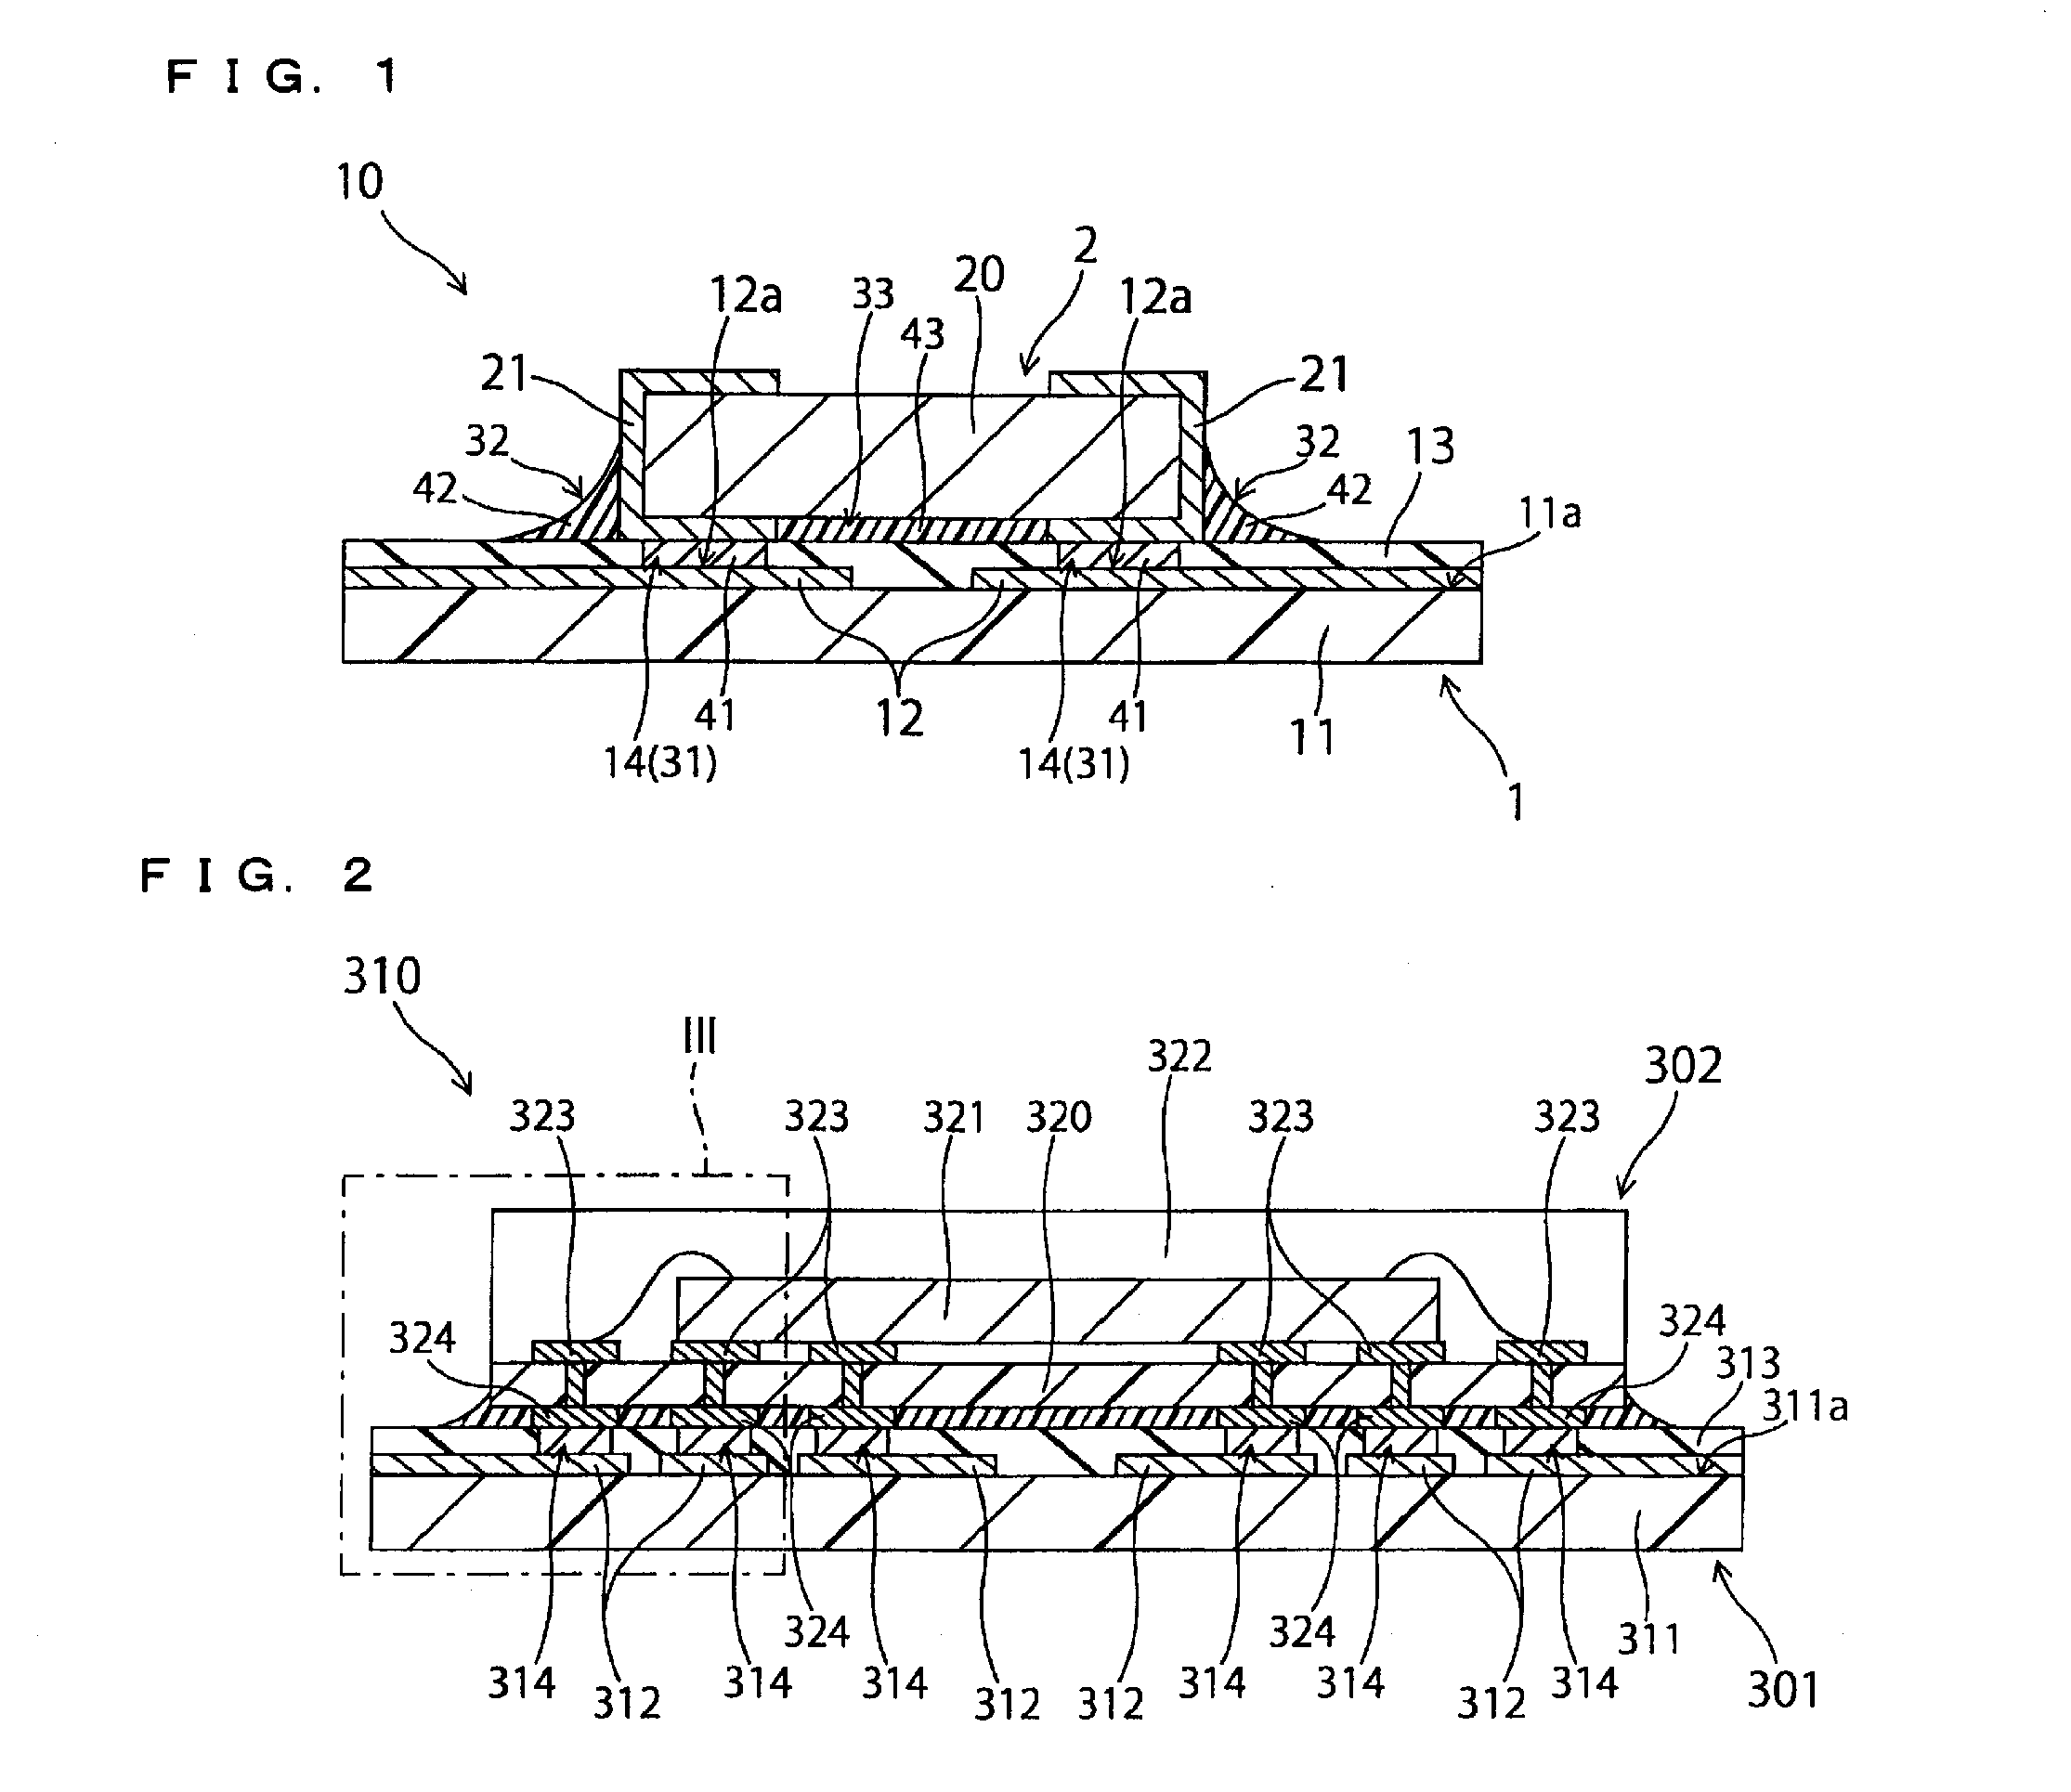 Method and system for producing component mounting board